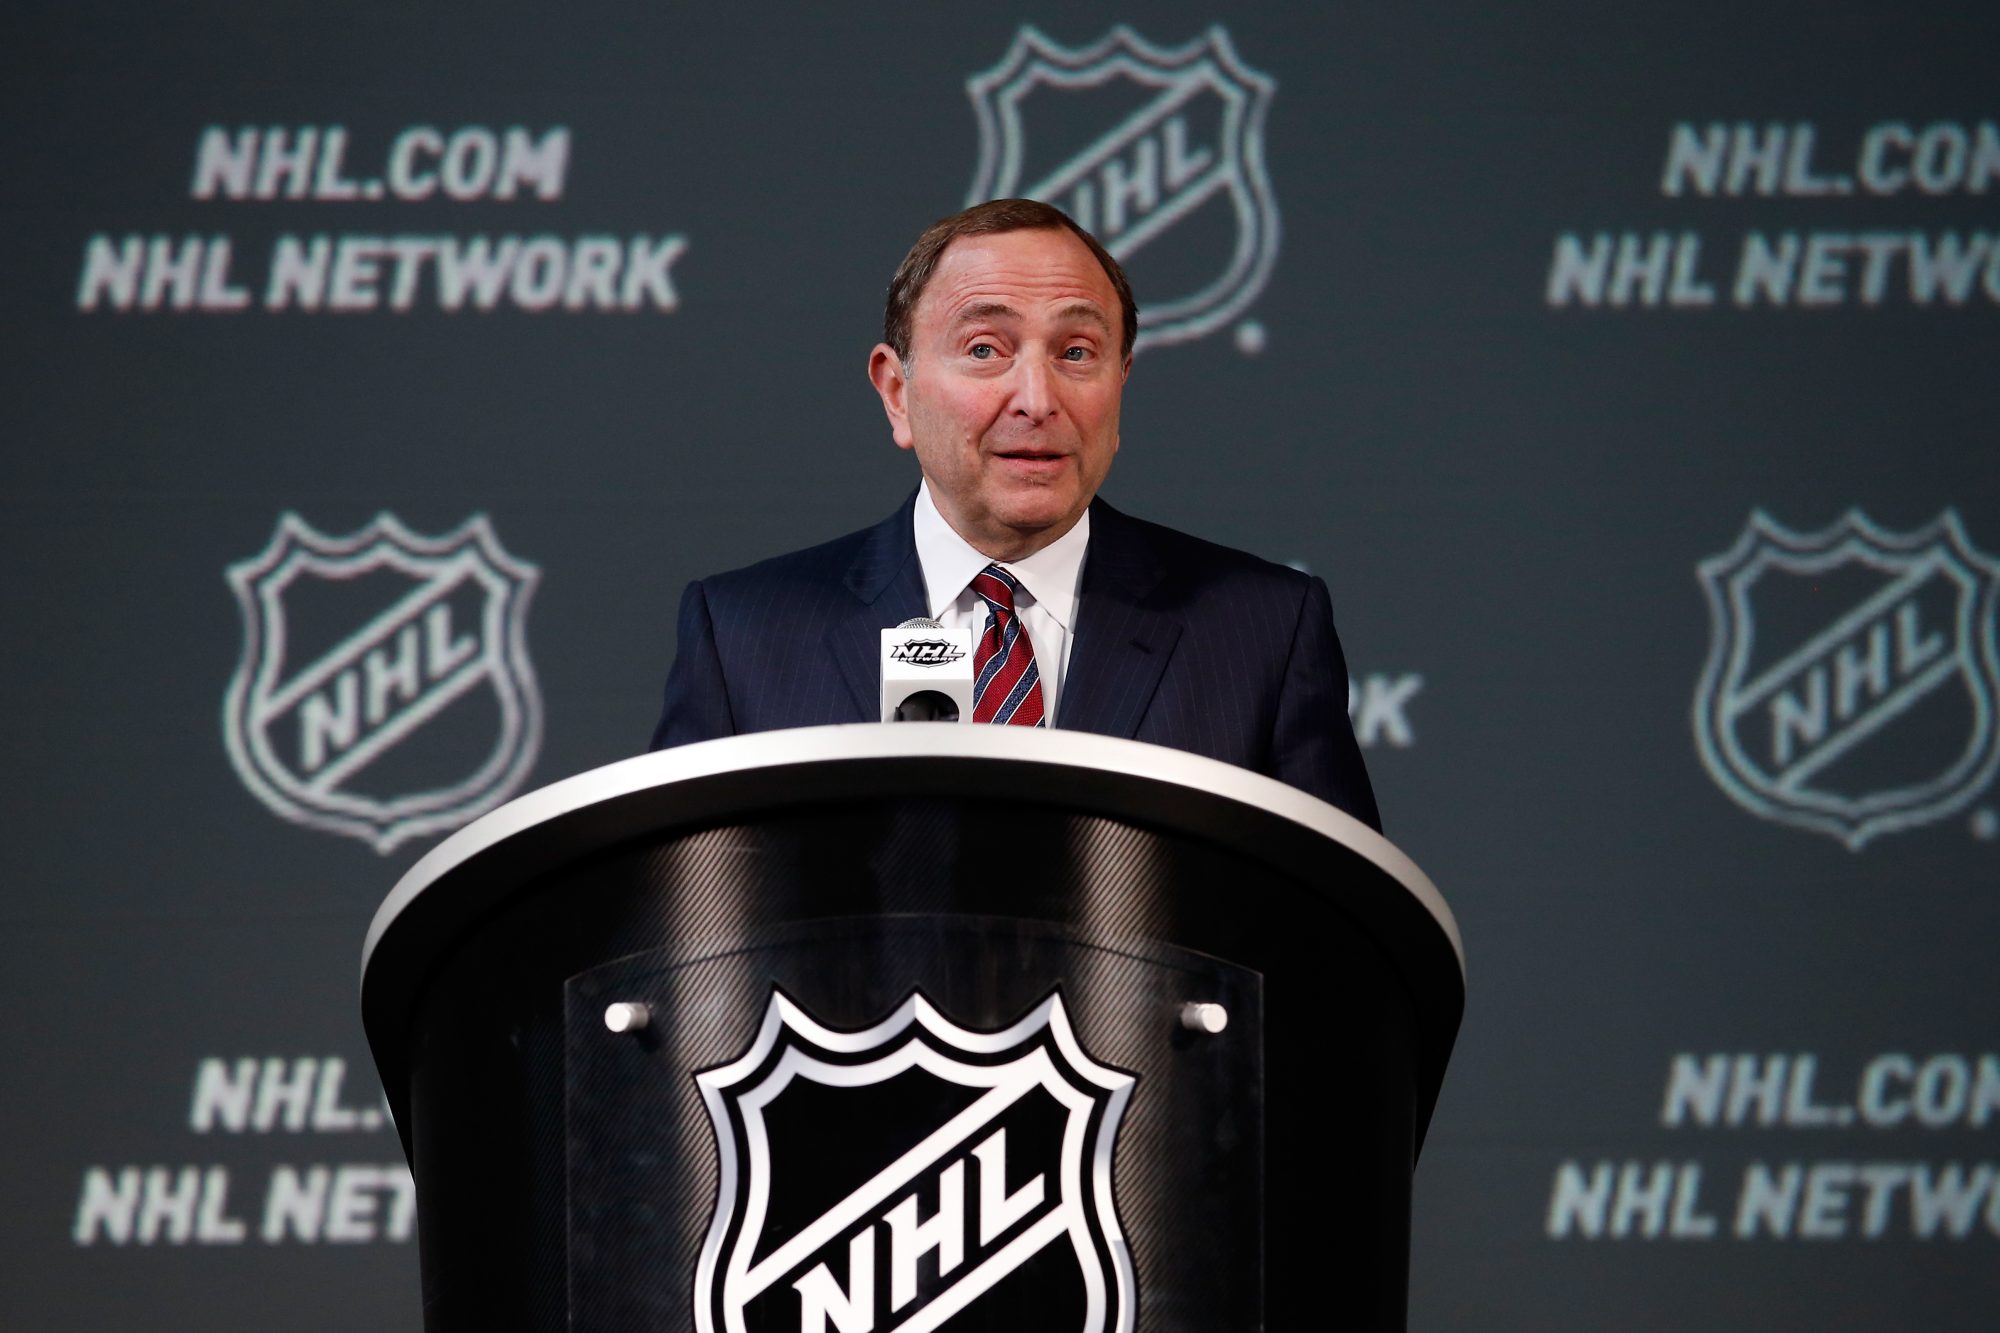 The NHL and NHLPA Announce The Declaration of Principles 